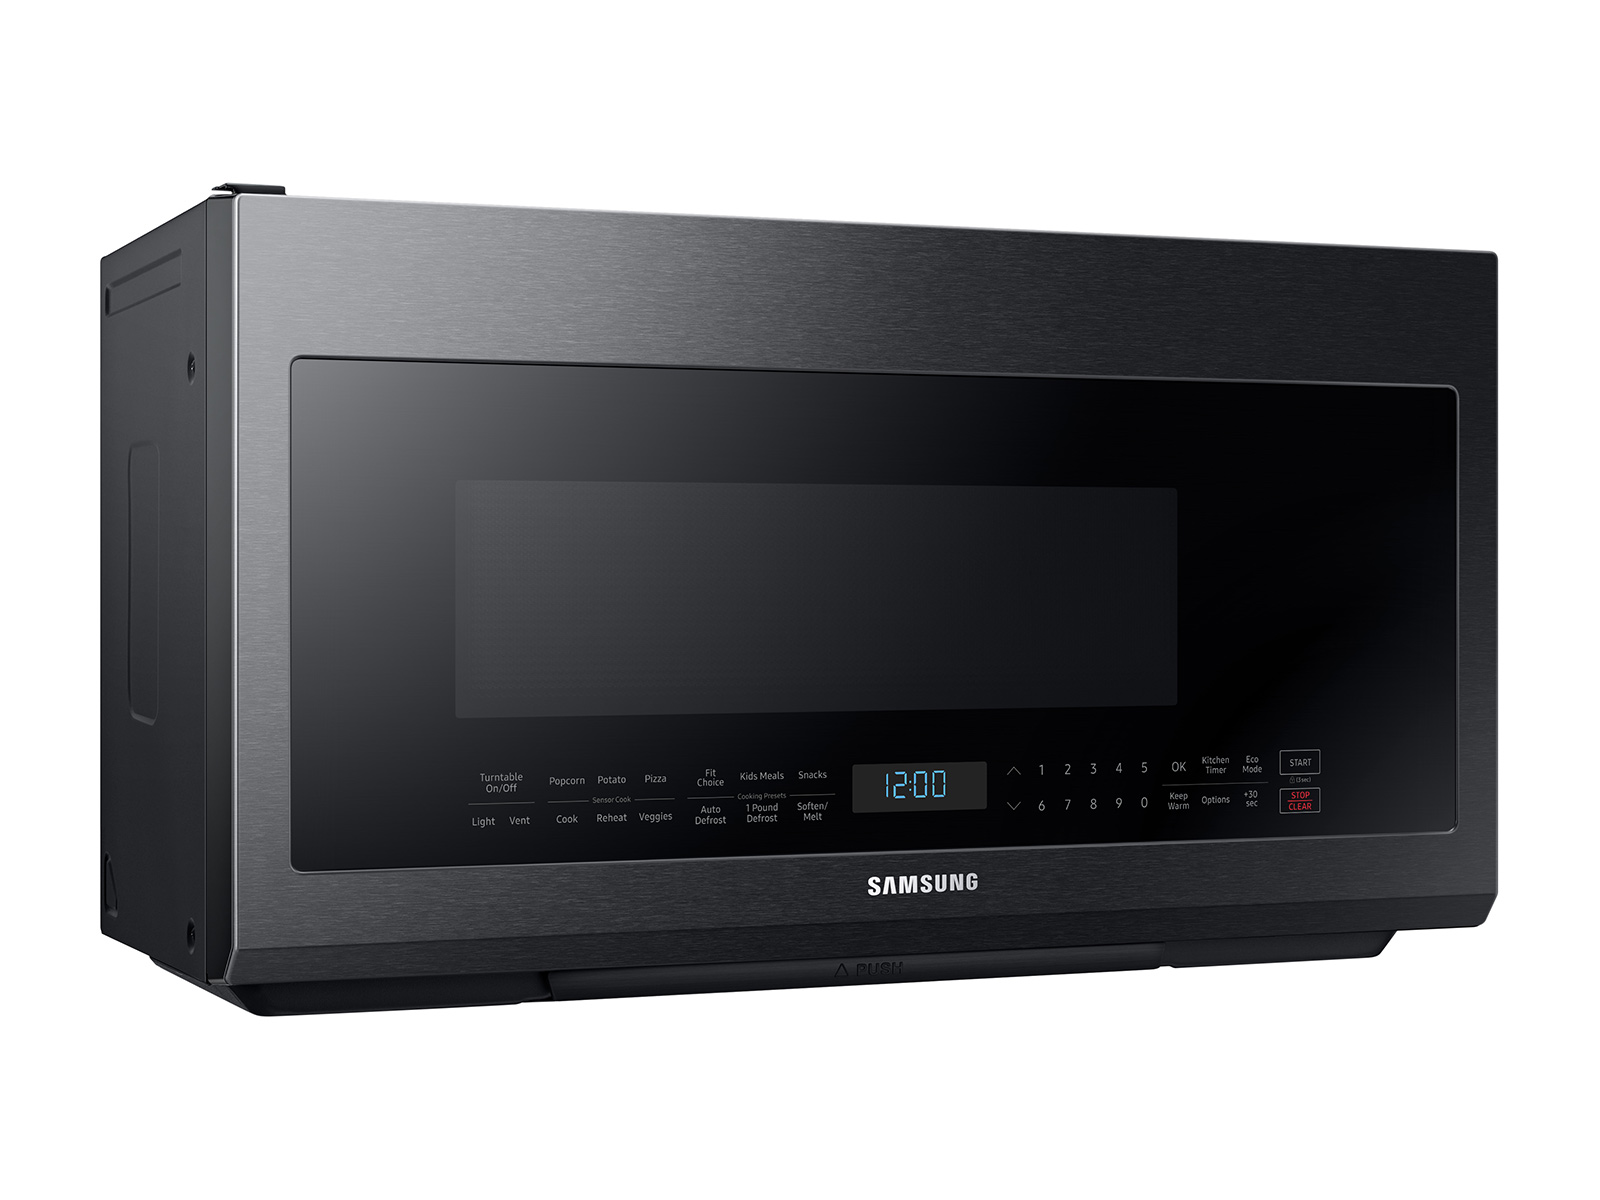 Thumbnail image of 2.1 cu. ft. Over-the-Range Microwave with Sensor Cooking in Fingerprint Resistant Black Stainless Steel